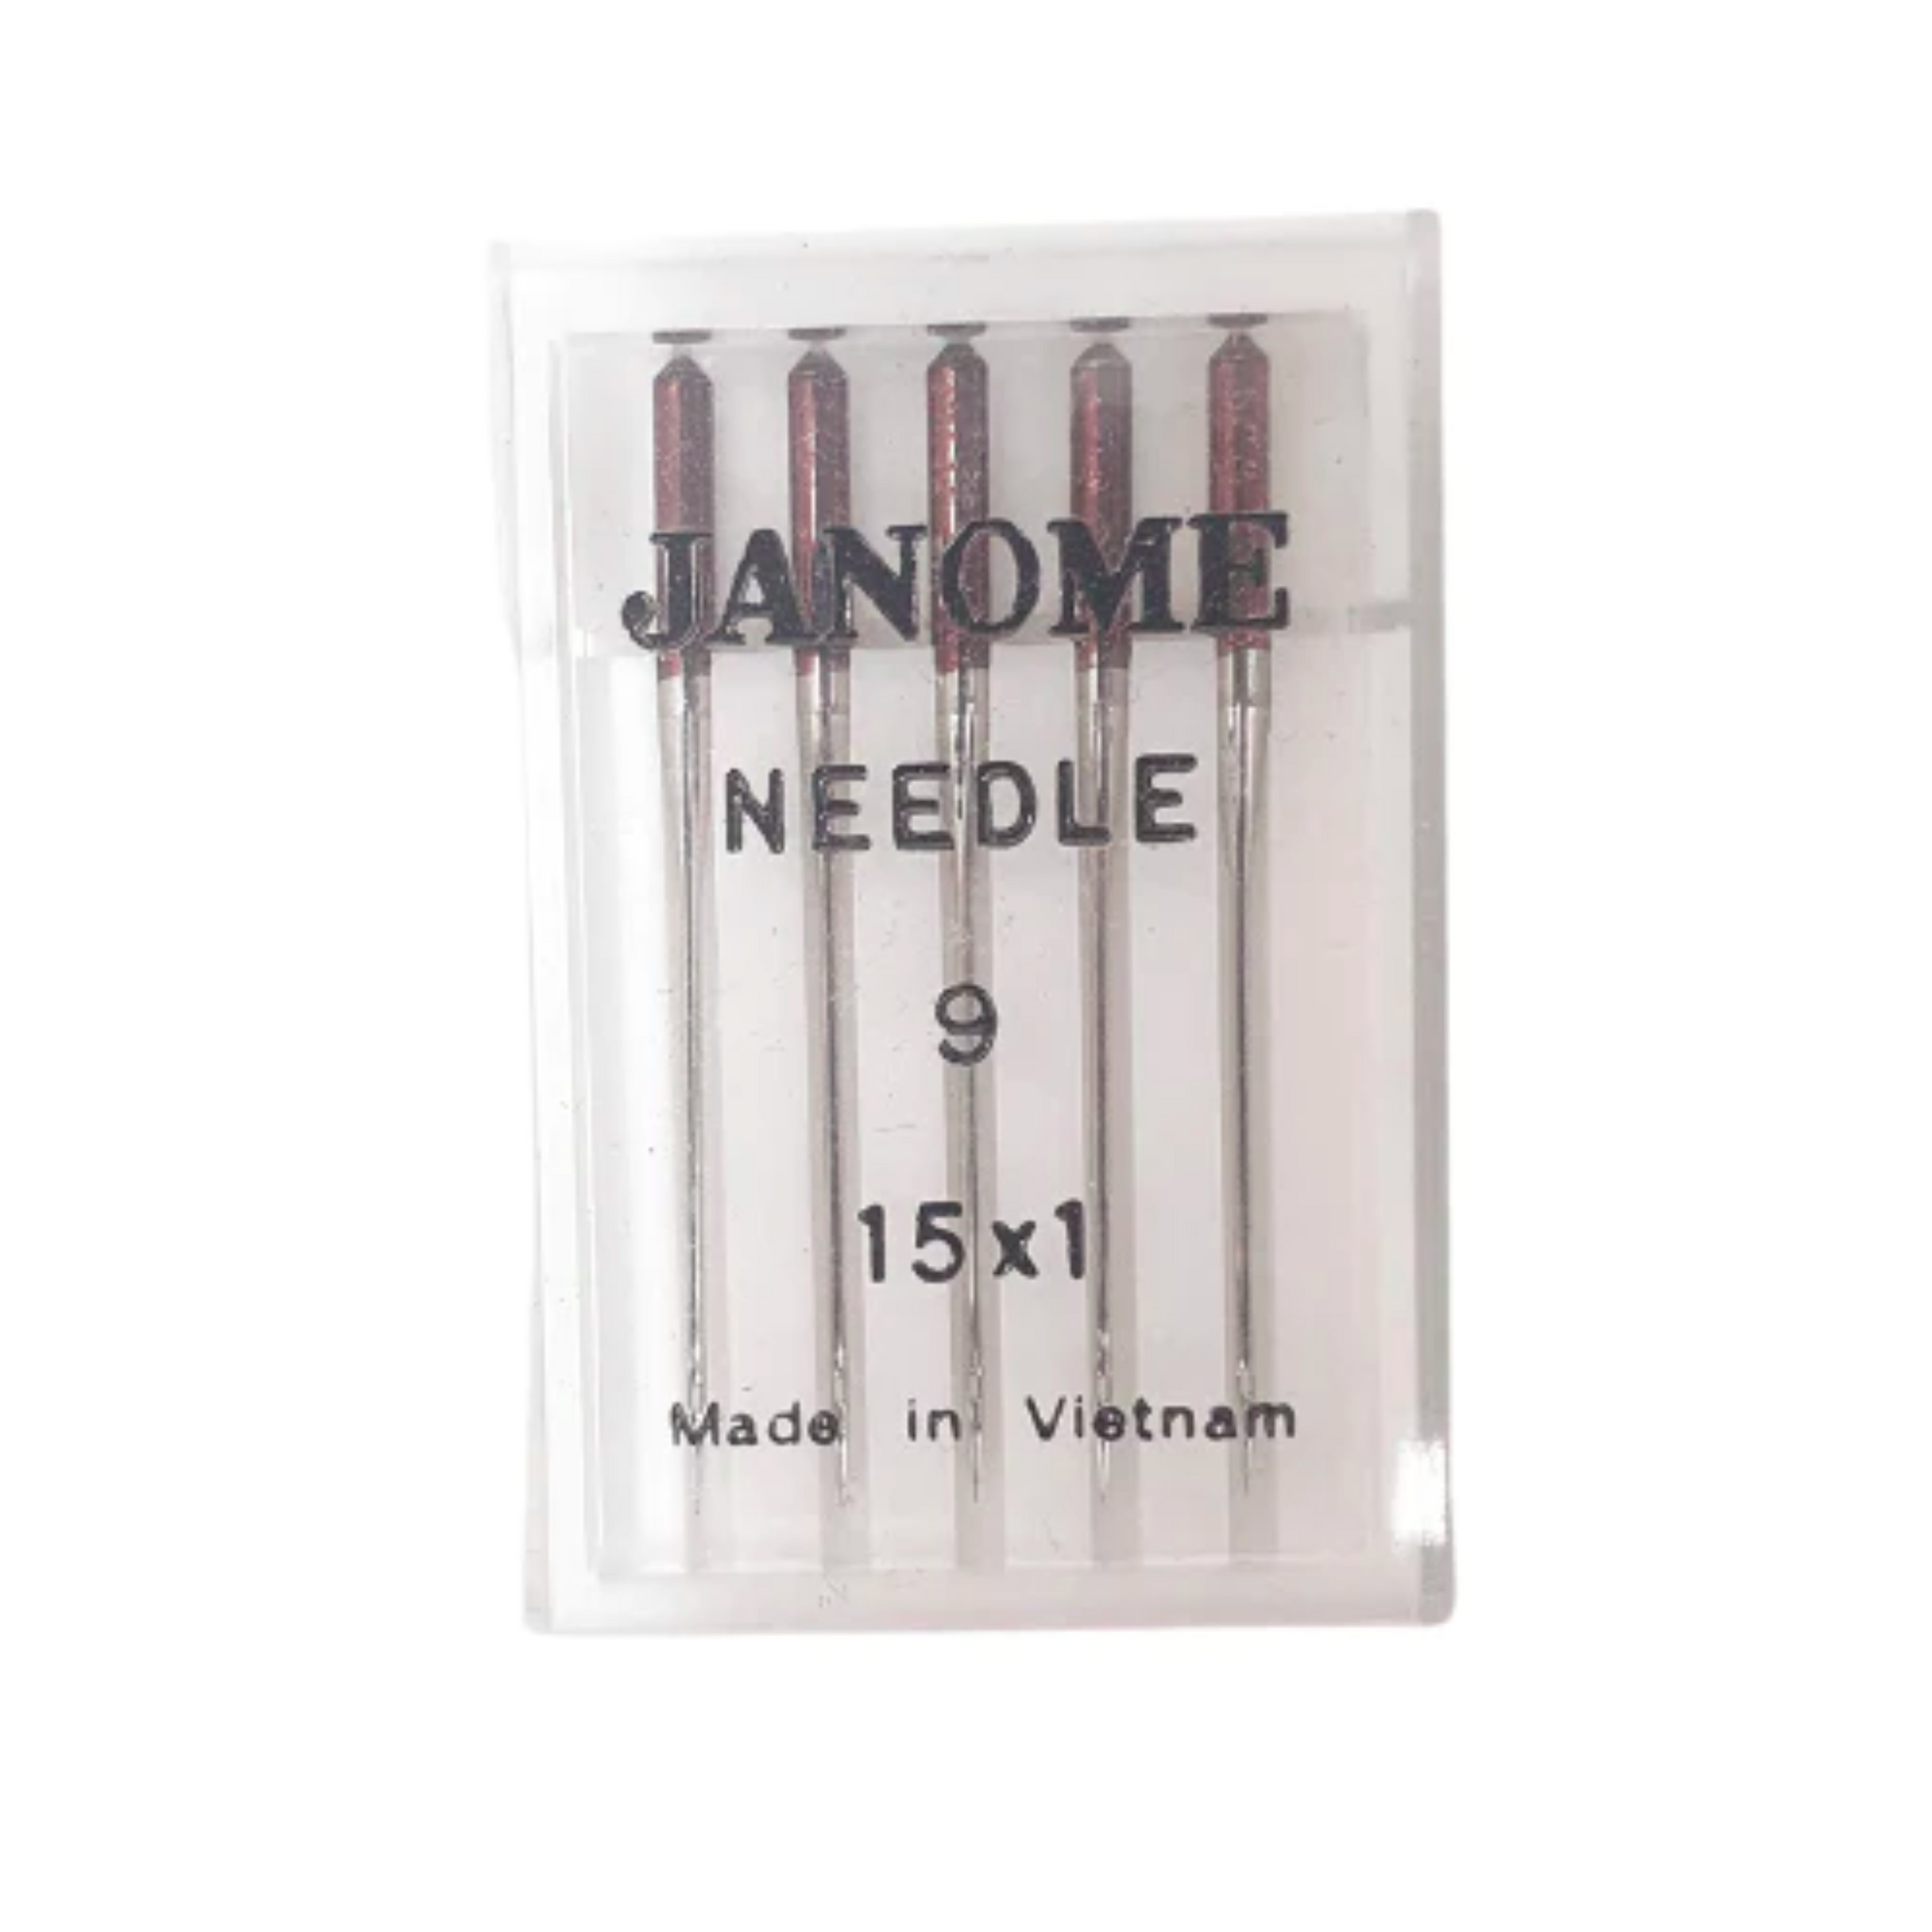 Janome - Brown tip needles - Multi color - Packets